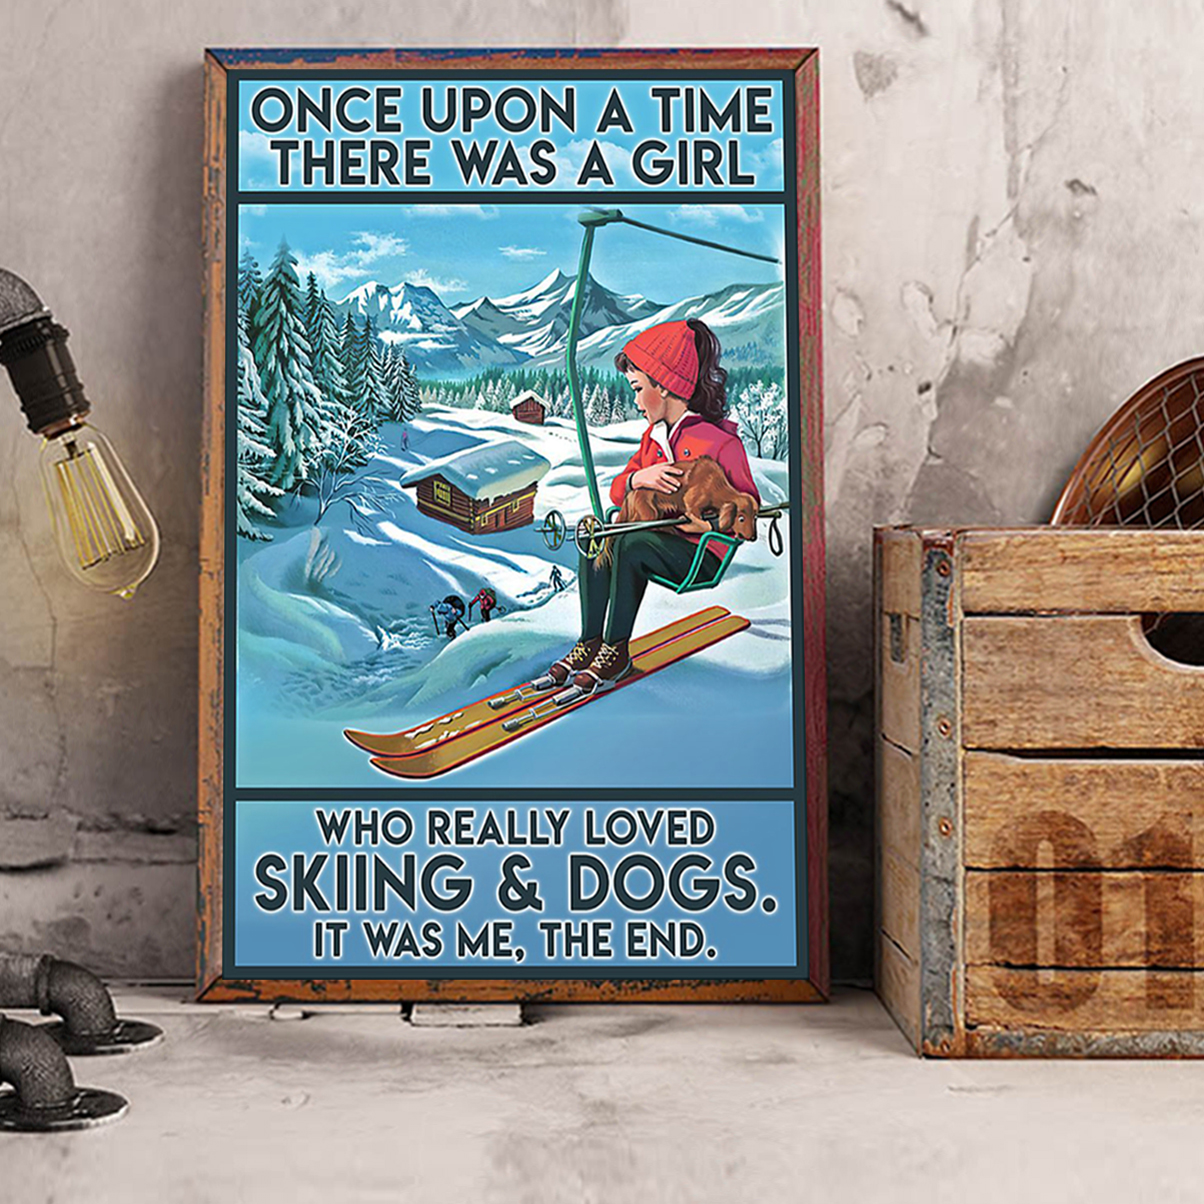 Once upon a time there was a girl who really loved skiing and dogs poster A2